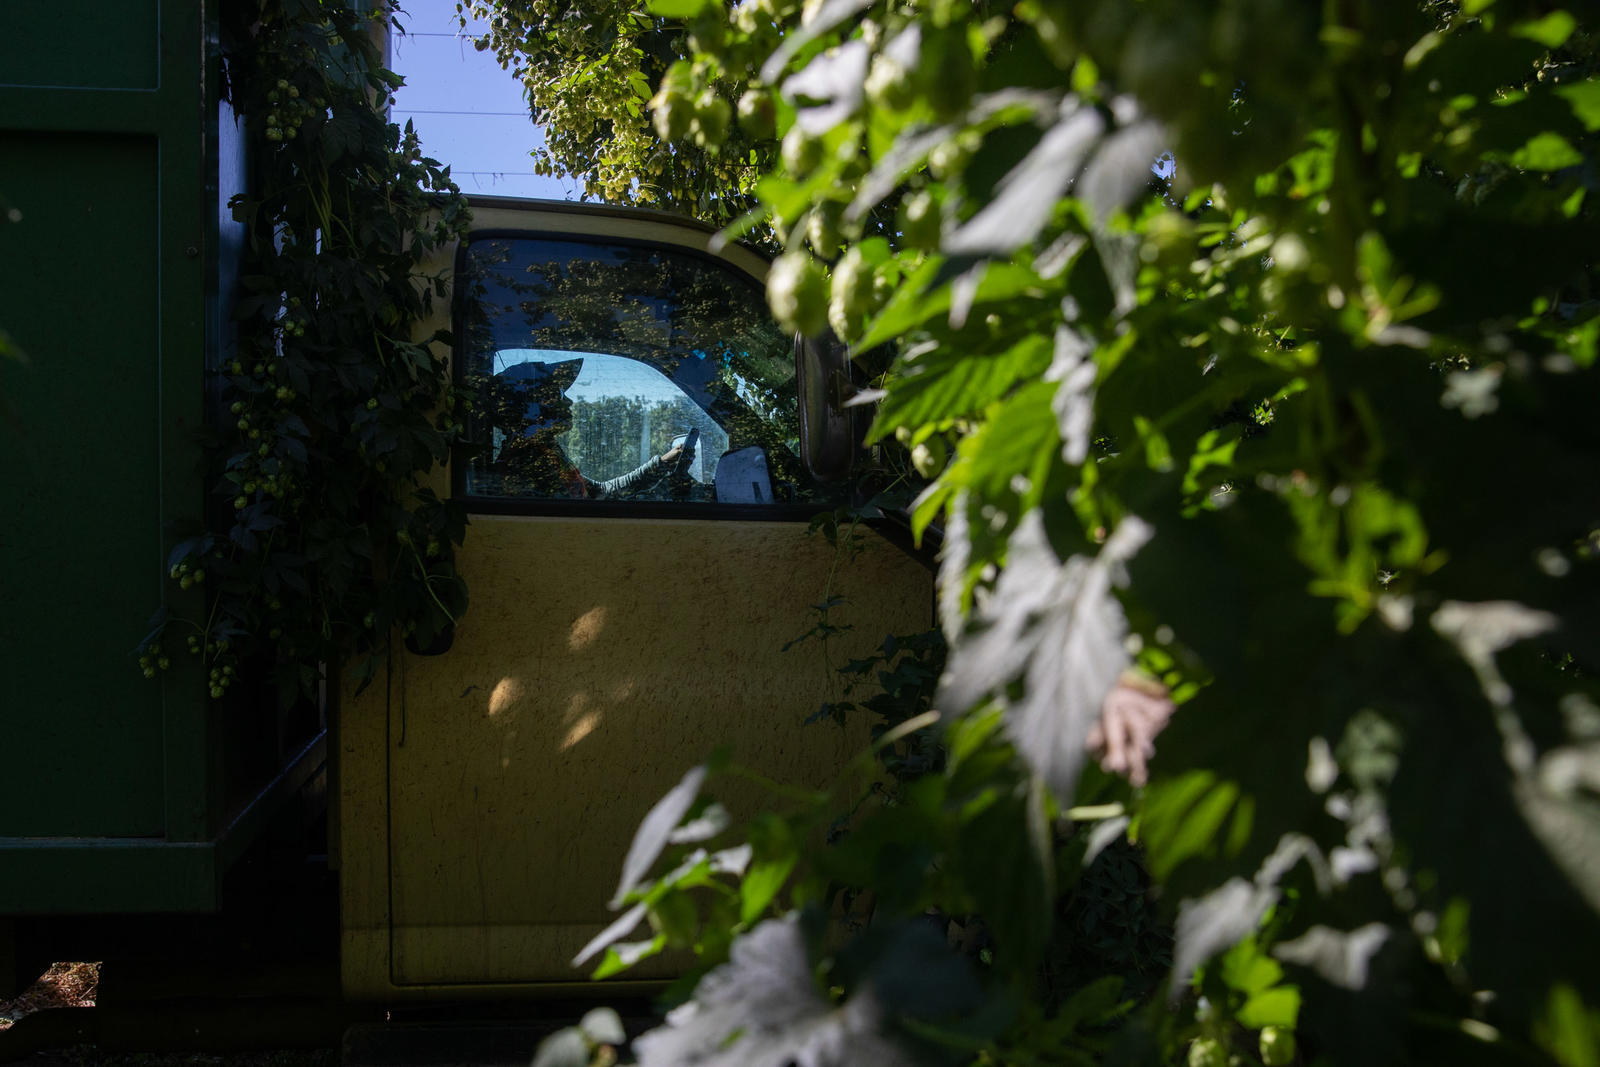 A worker in the hops field at Perrault Farms in Toppenish in Yakima County on Sept. 16, 2021. November 2021